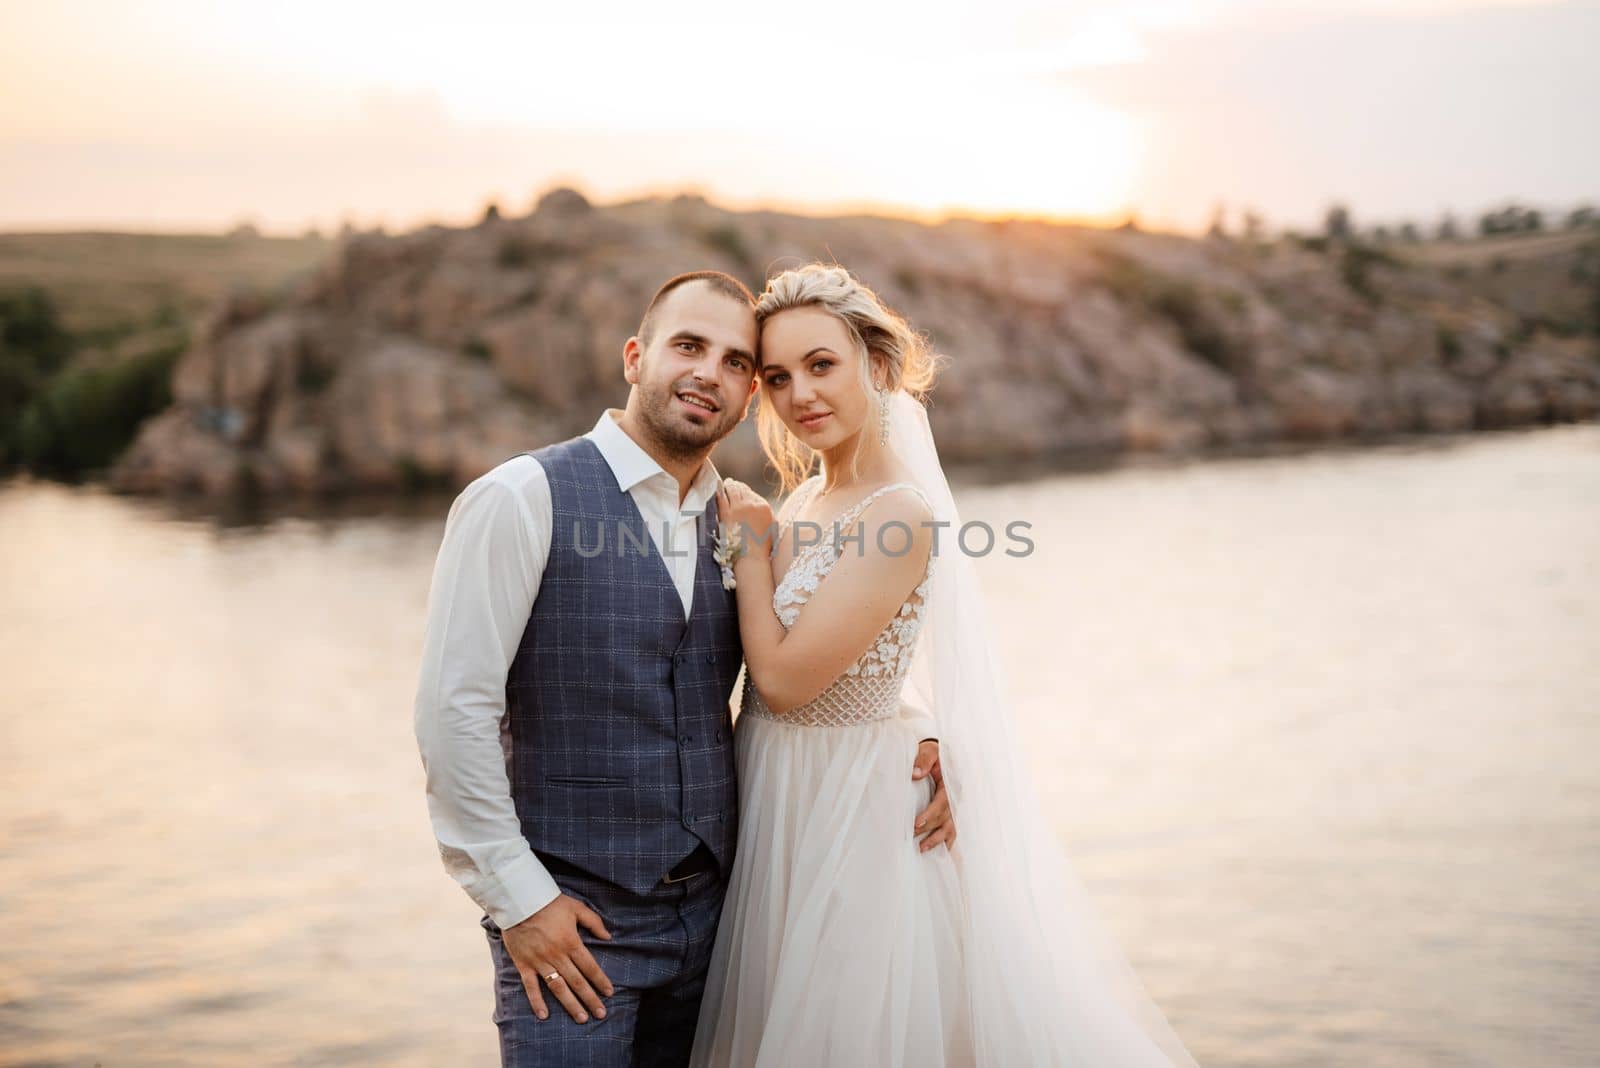 bride blonde girl and groom near the river by Andreua